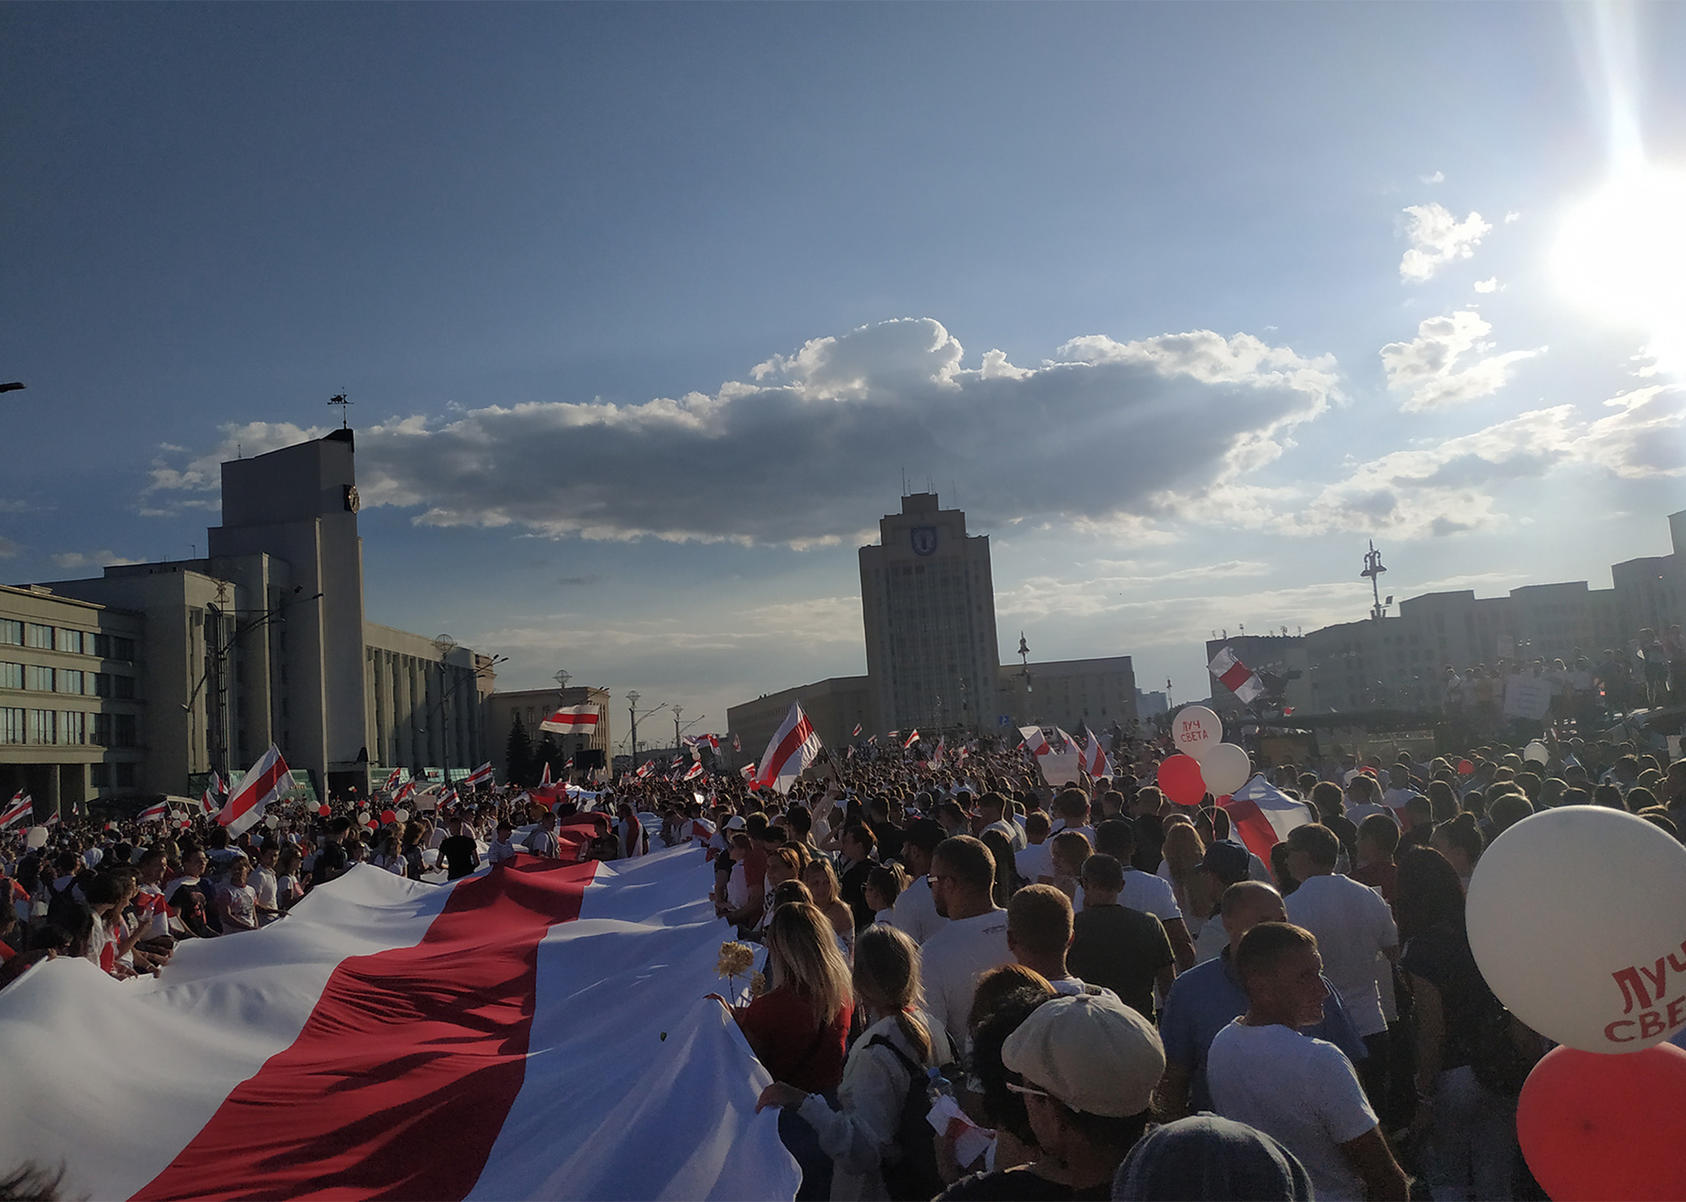 Protesters in Minsk call for a new election after the August 9 presidential vote was widely believed to be fraudulent. (Максим Шикунец/Wikimedia Commons)